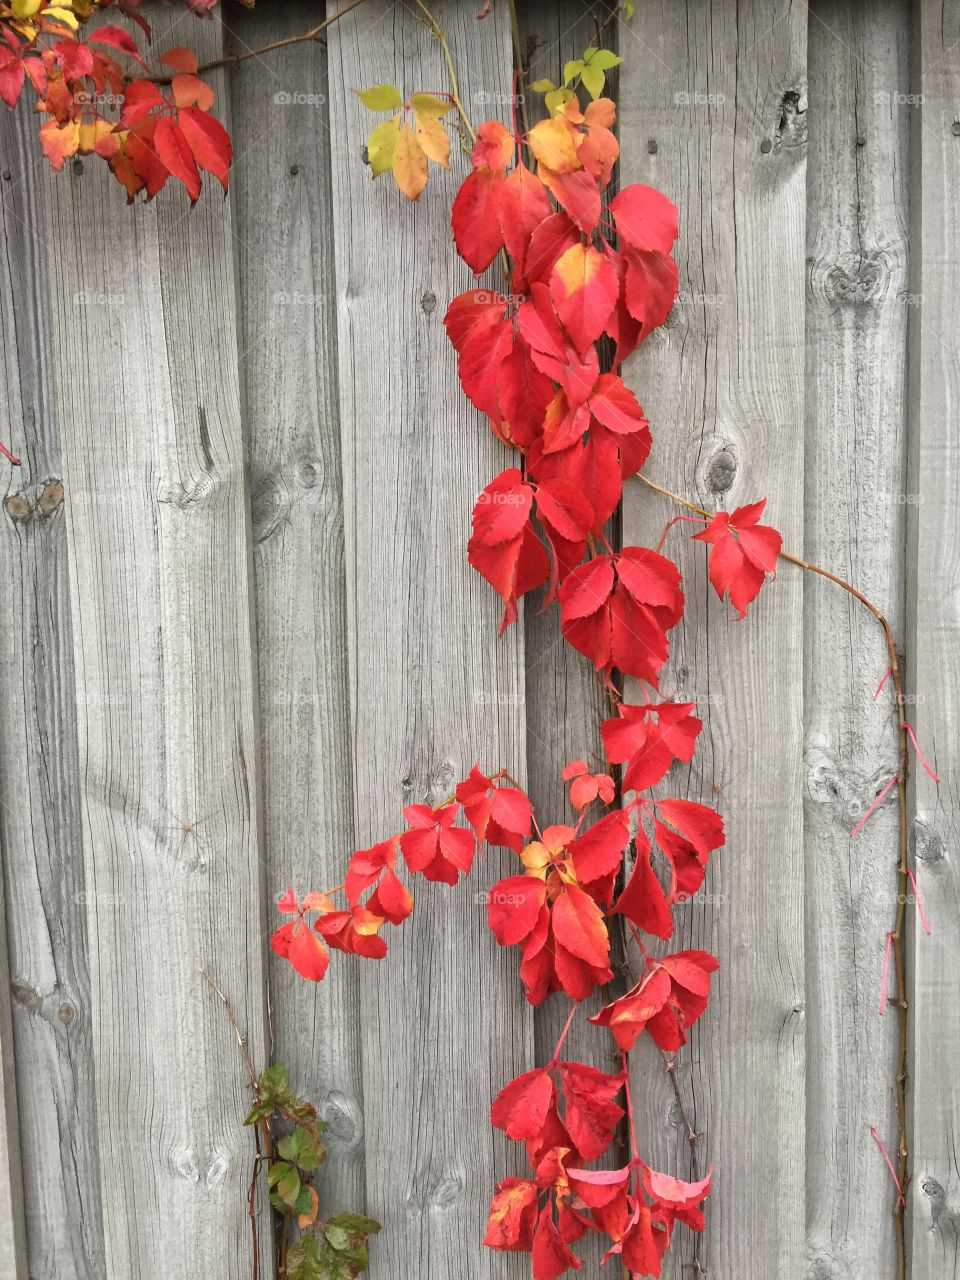 Red leaves. Fall leaves falling down a fence